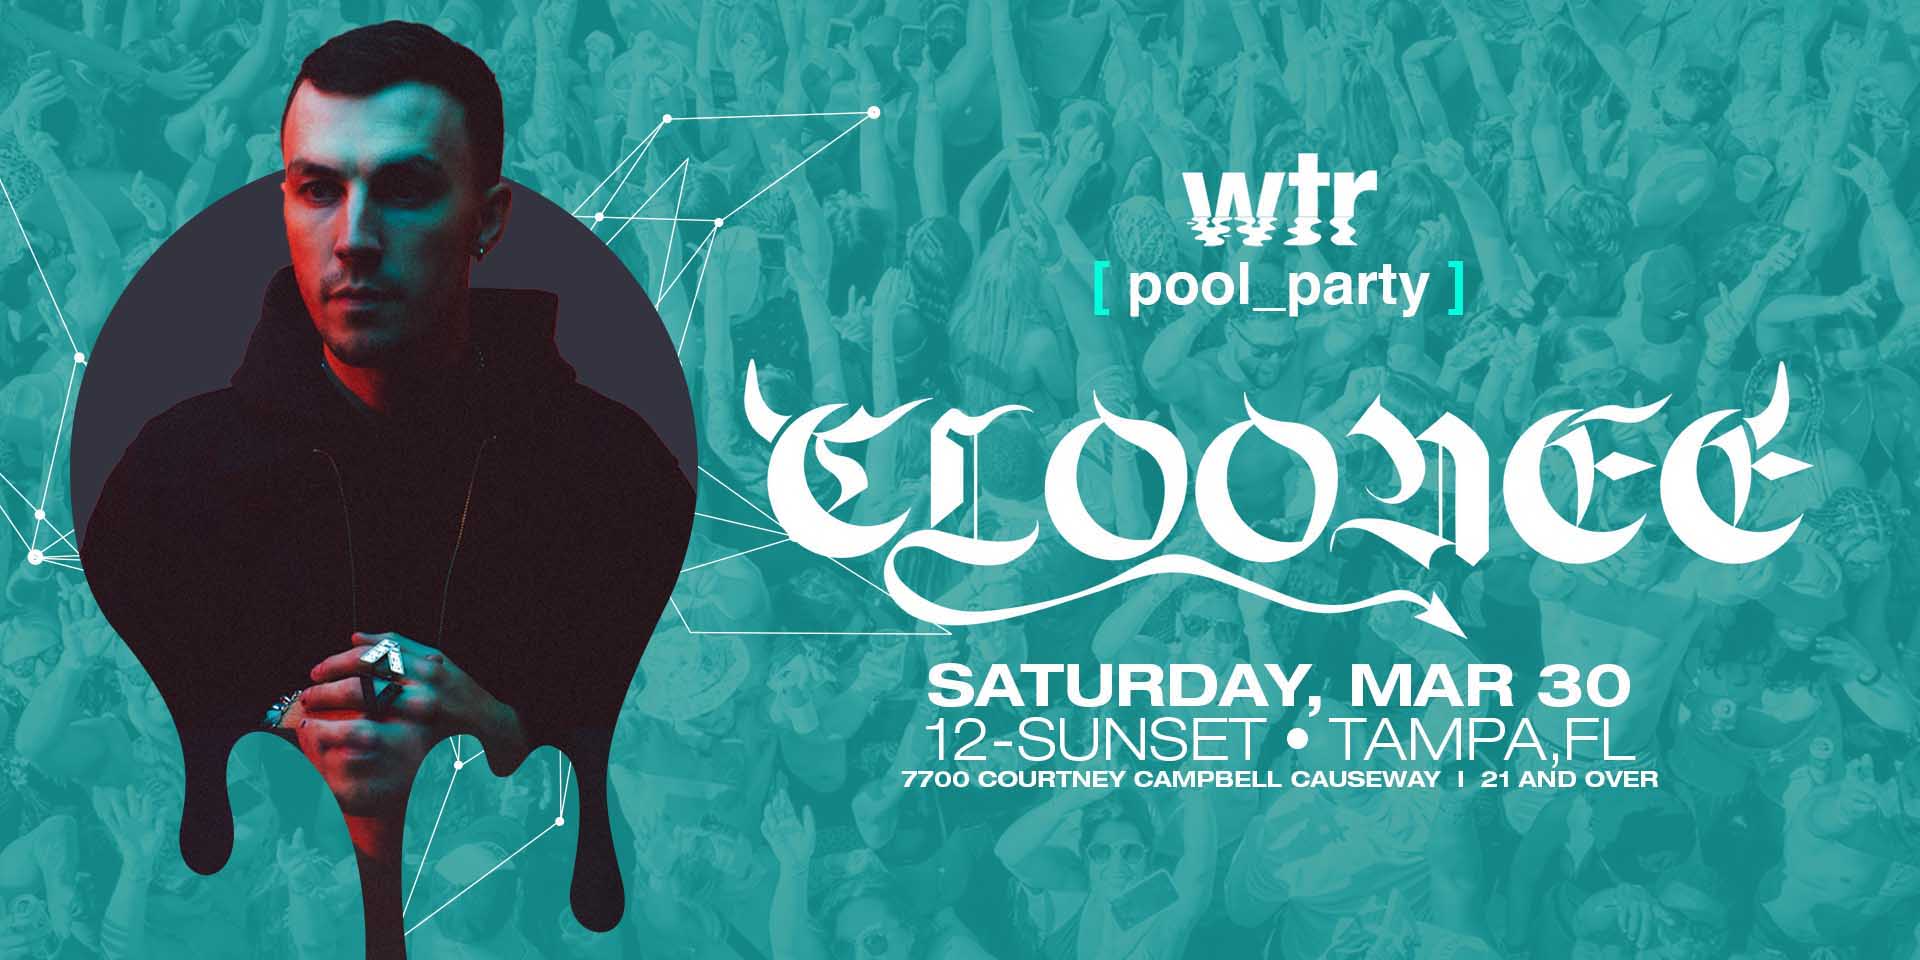 Cloonee  at wtr Pool  promotional image